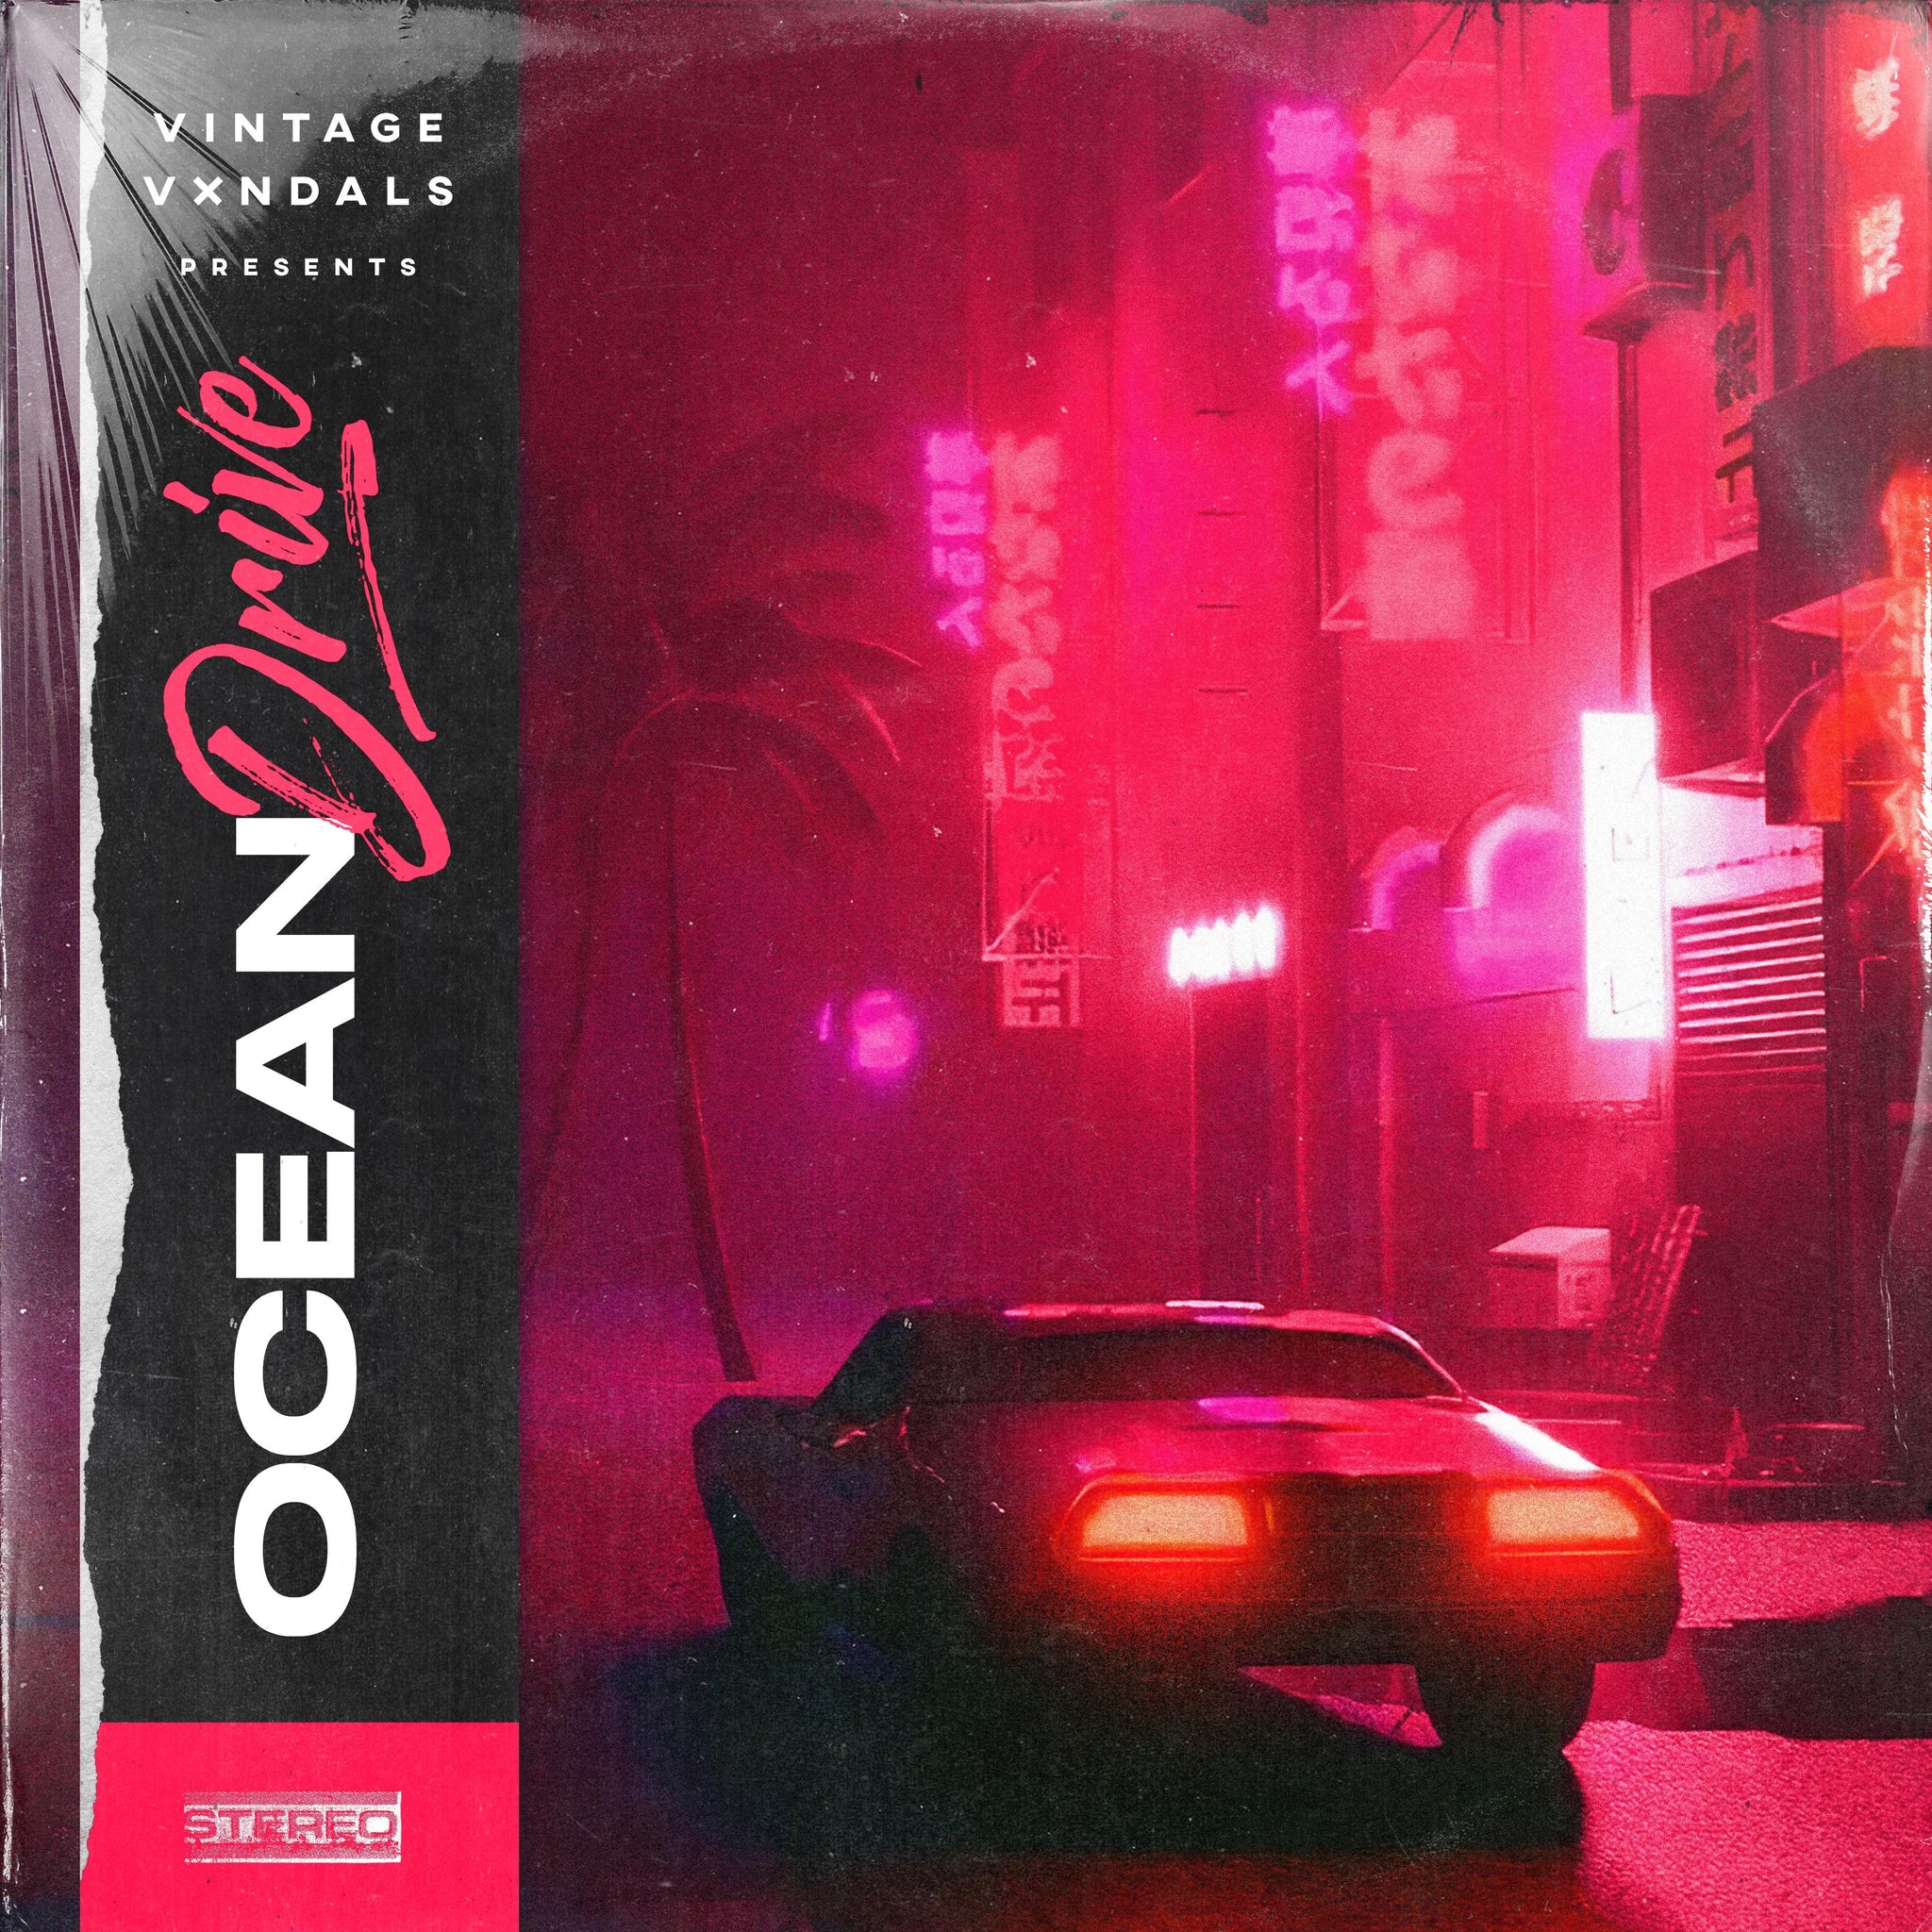 The Vintage Vxndals - Ocean Drive - The Sample Lab